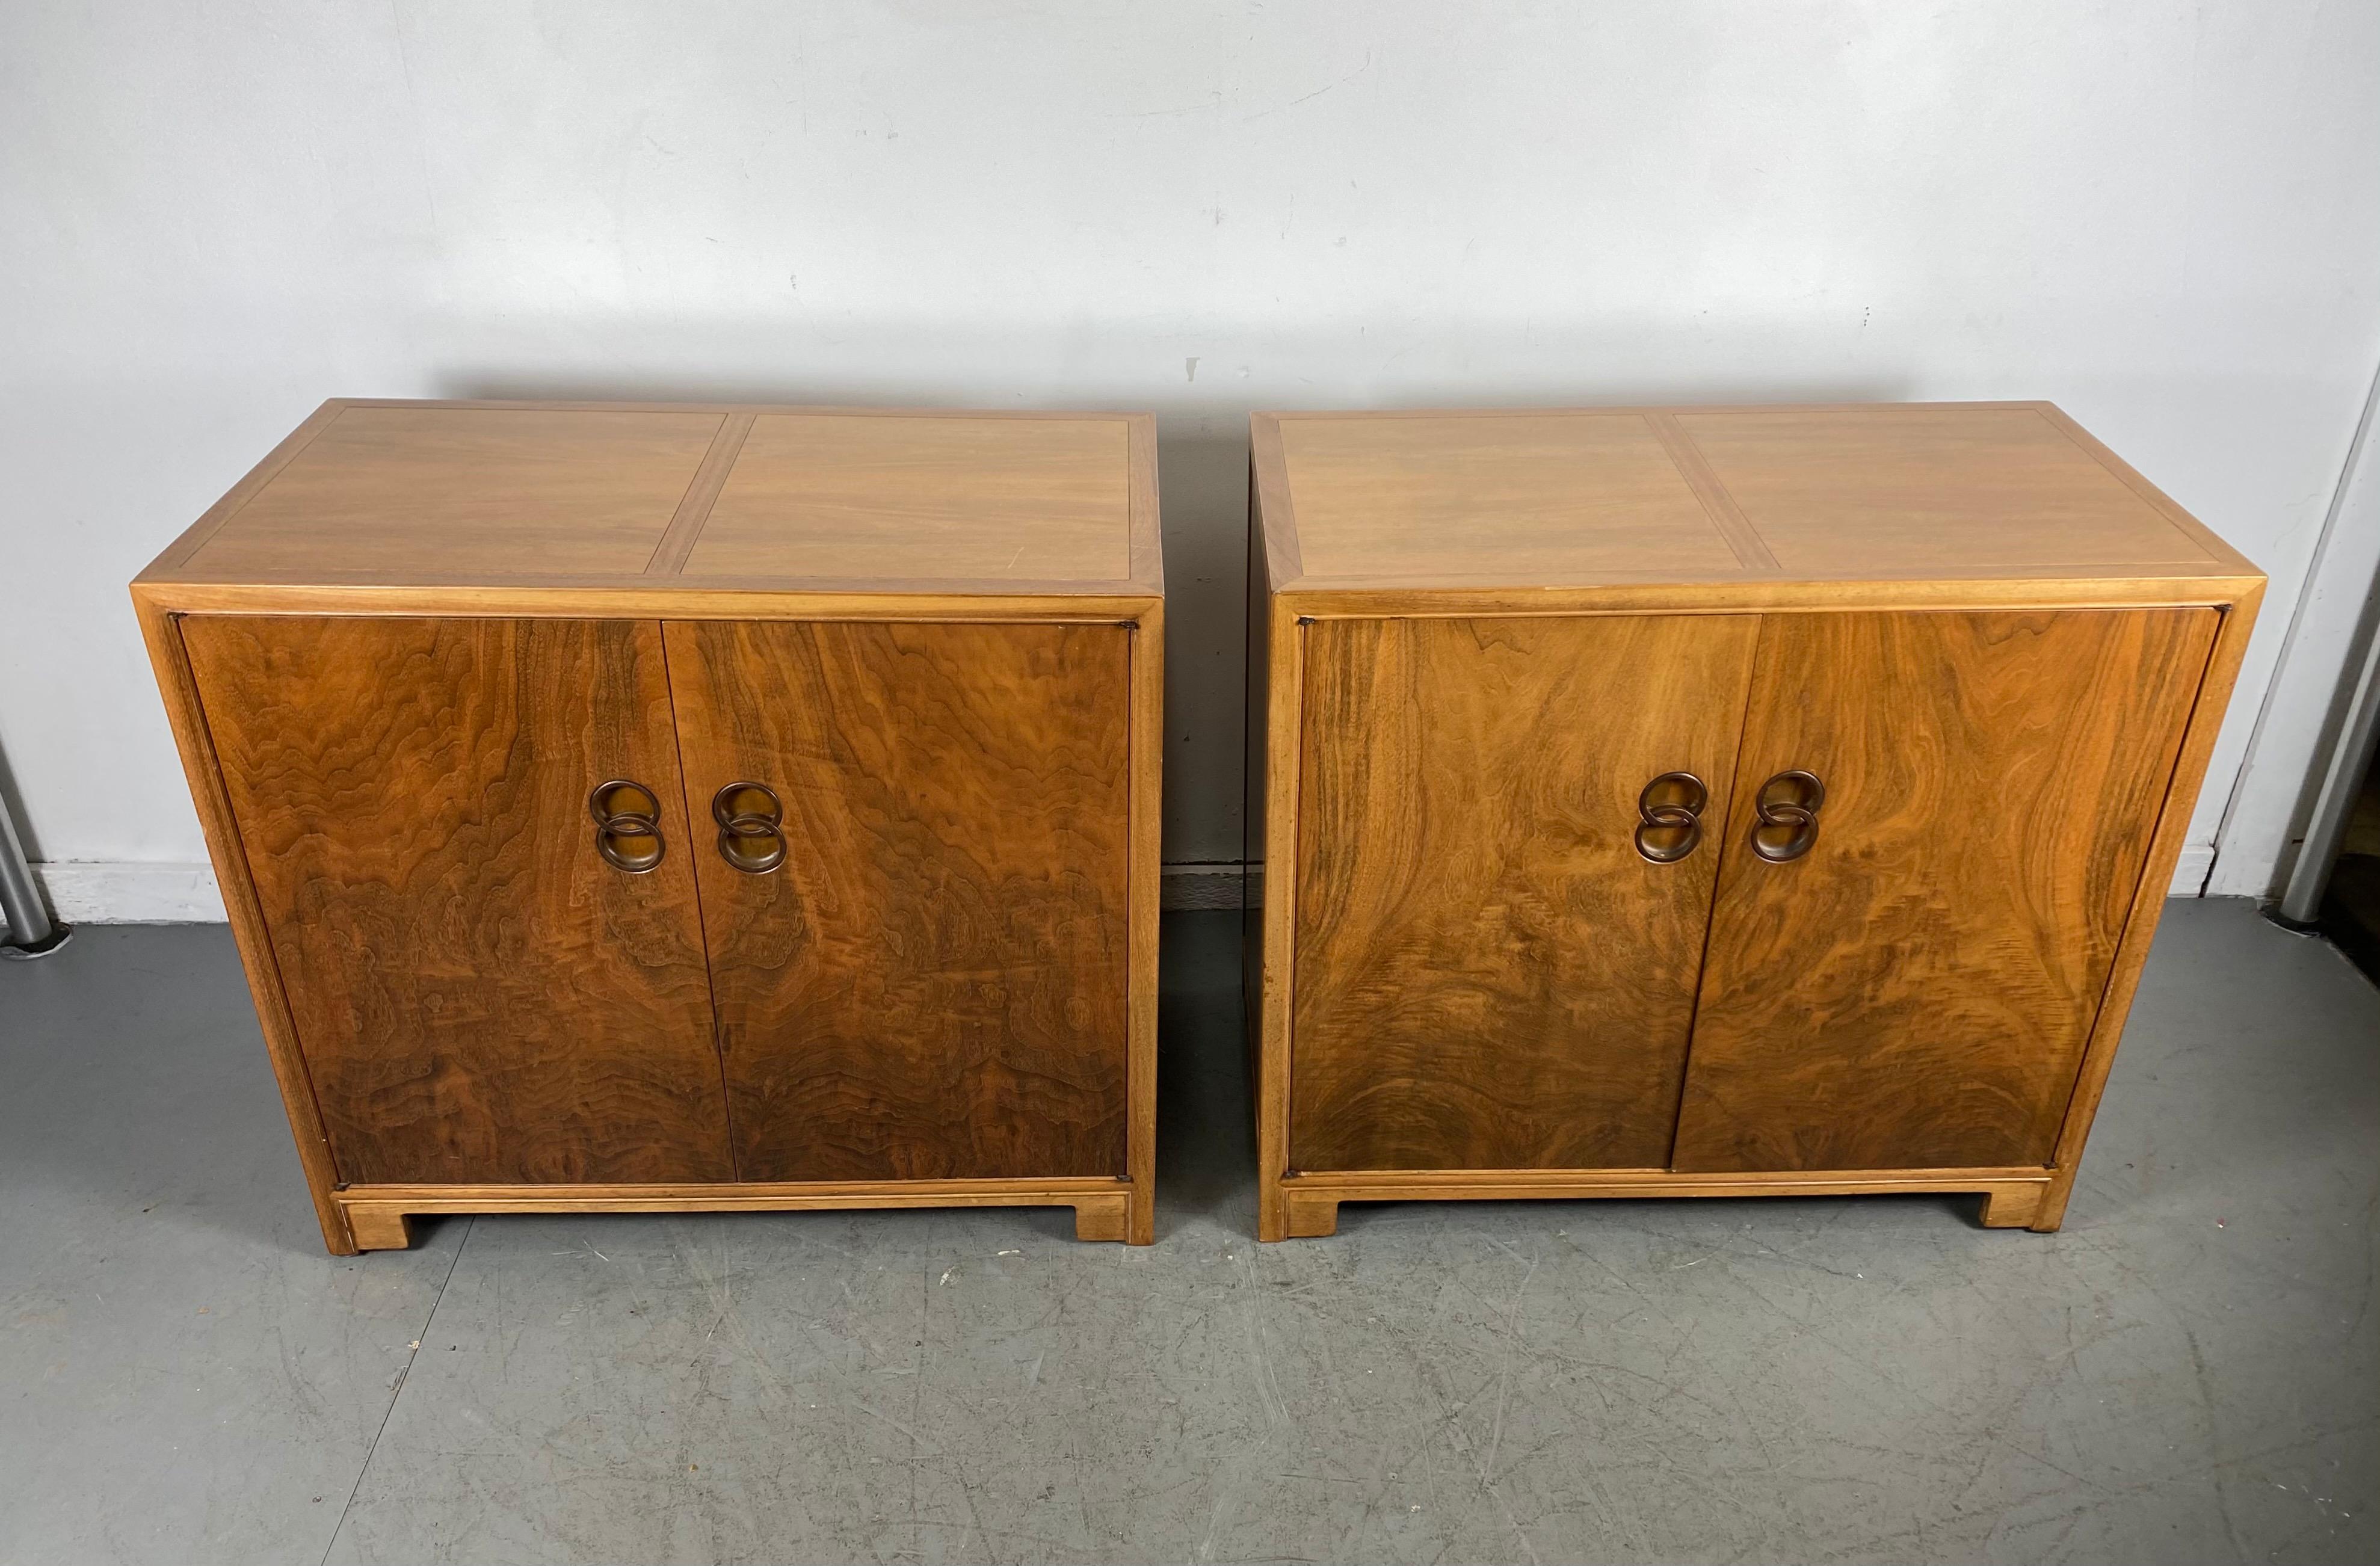 Stunning pair of modernist chests by Michael Taylor for Baker, Far East Collection, nice original condition, and finish, minor lite scratches, wonderful wood graining, hand delivery avail to New York City or anywhere en route from Buffalo NY.